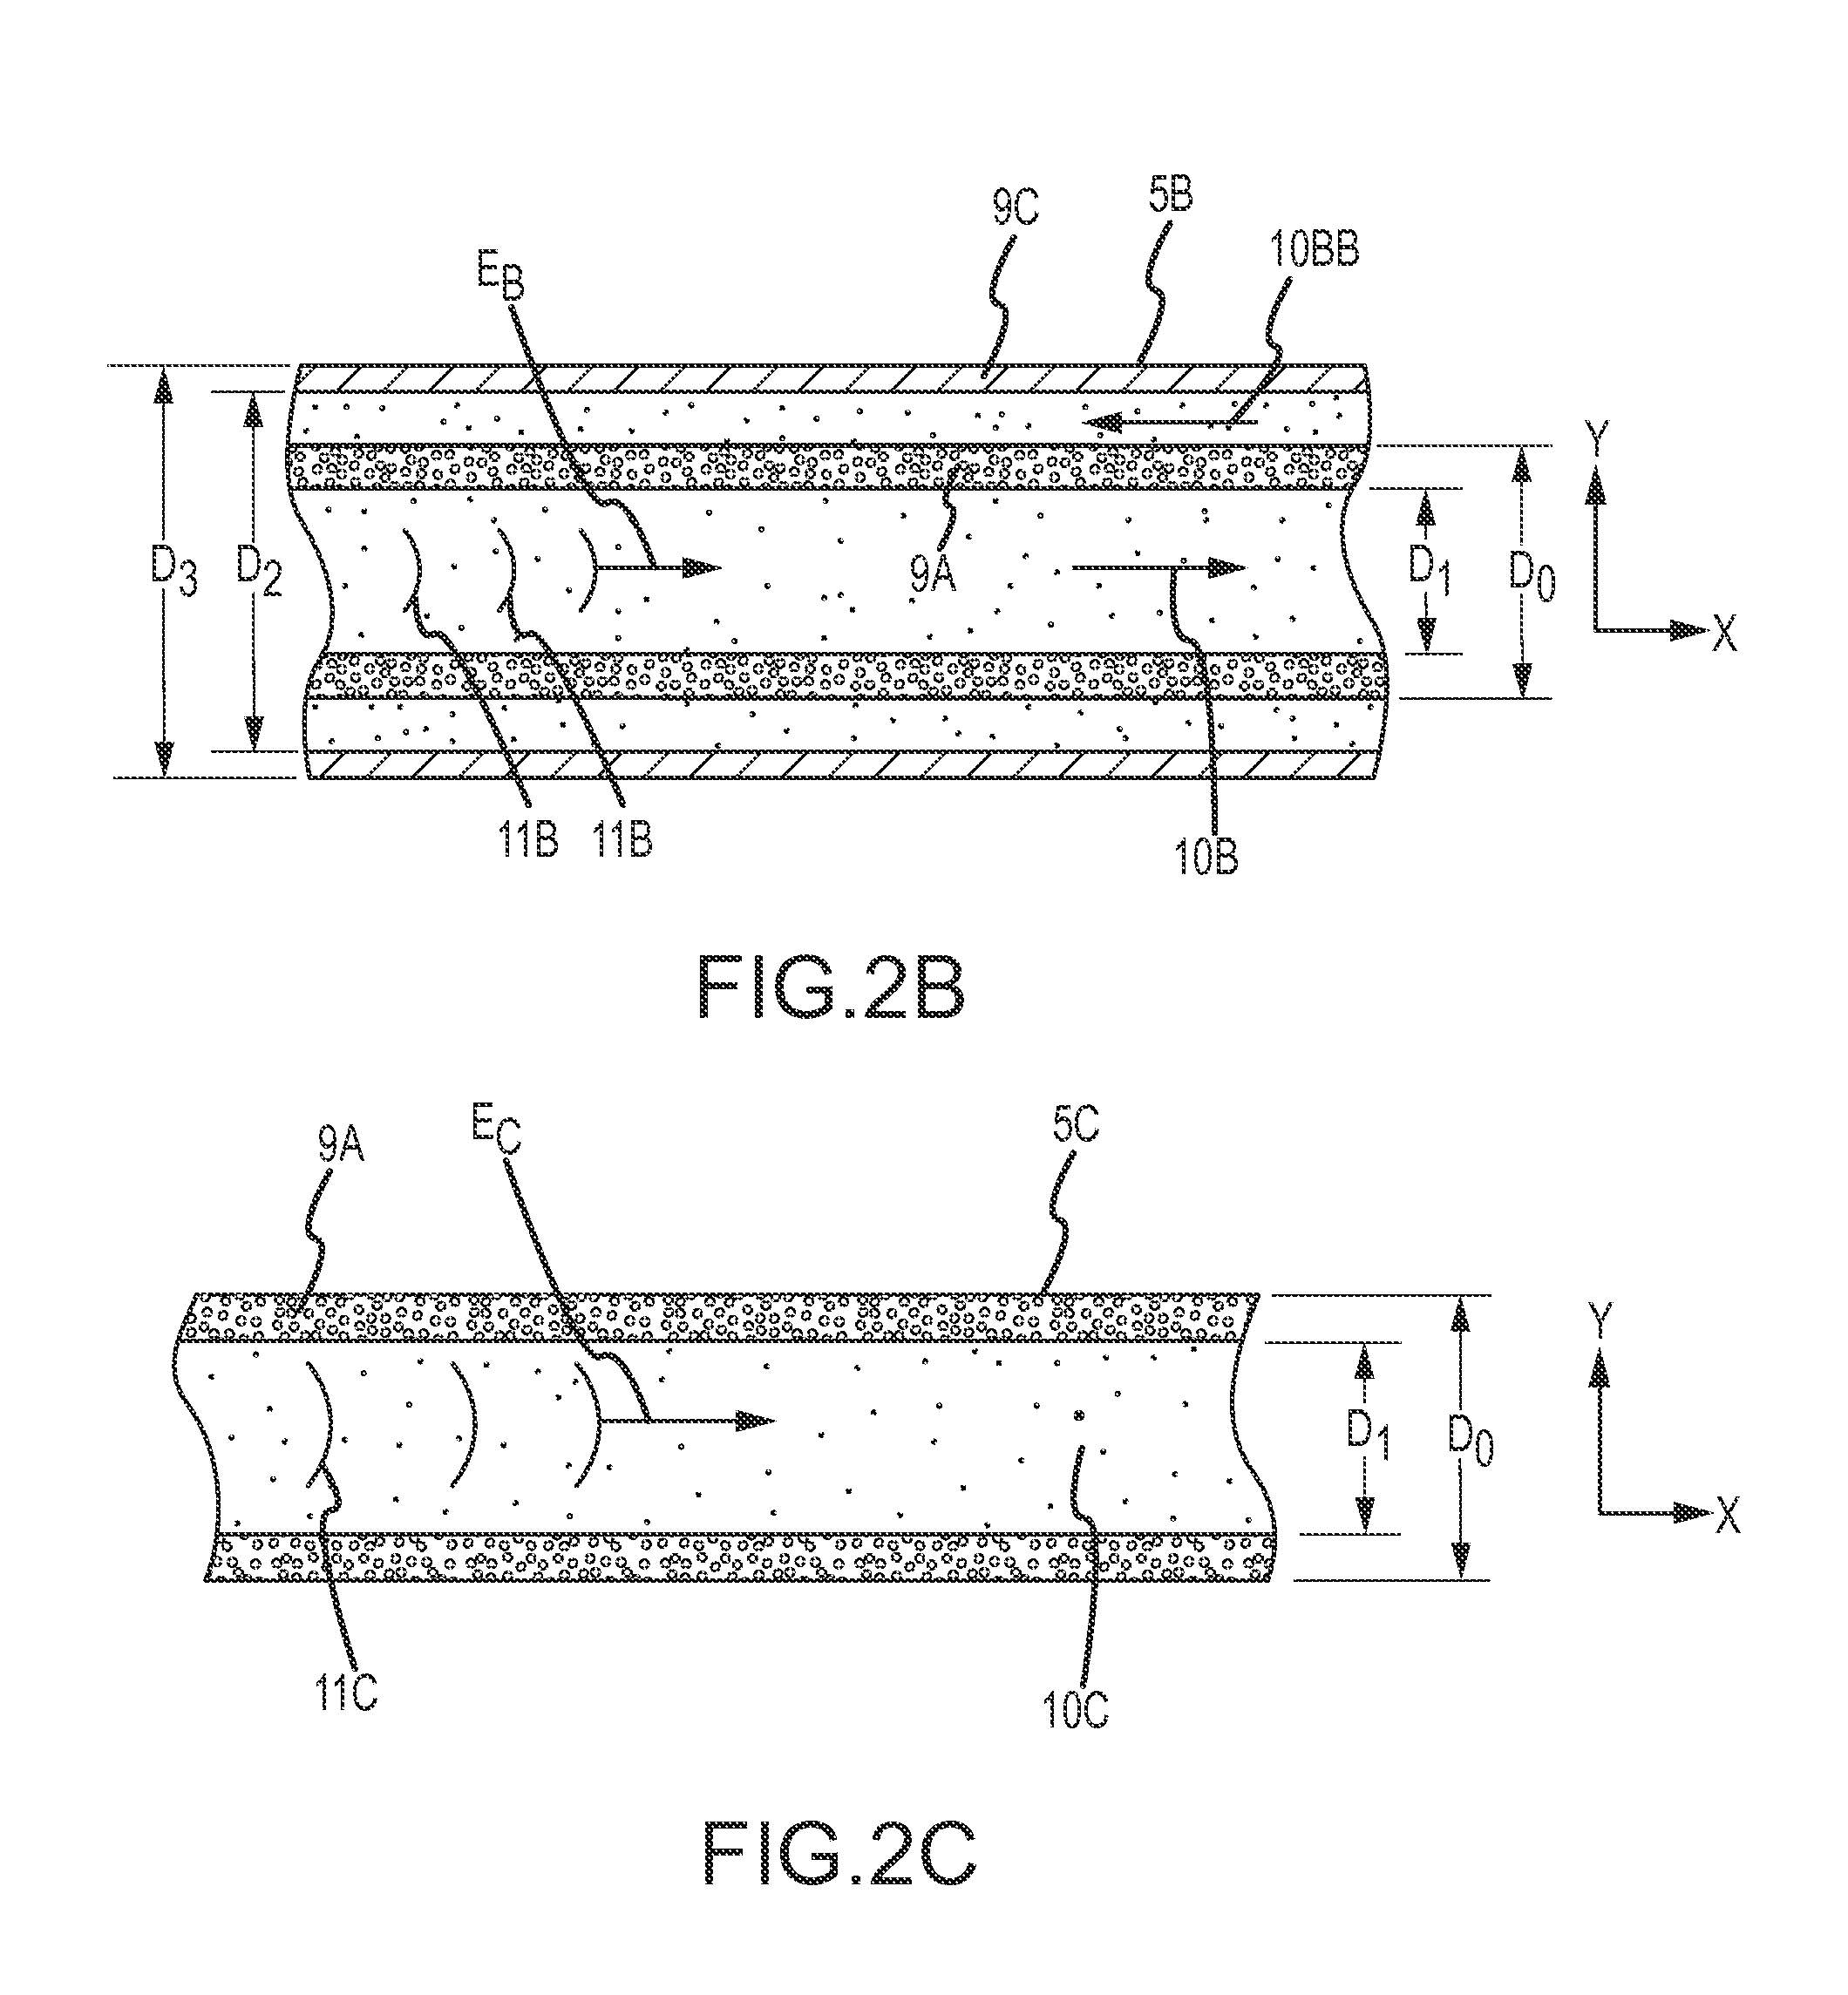 System for delivering acoustic energy in connection with therapeutic ultrasound systems and catheters